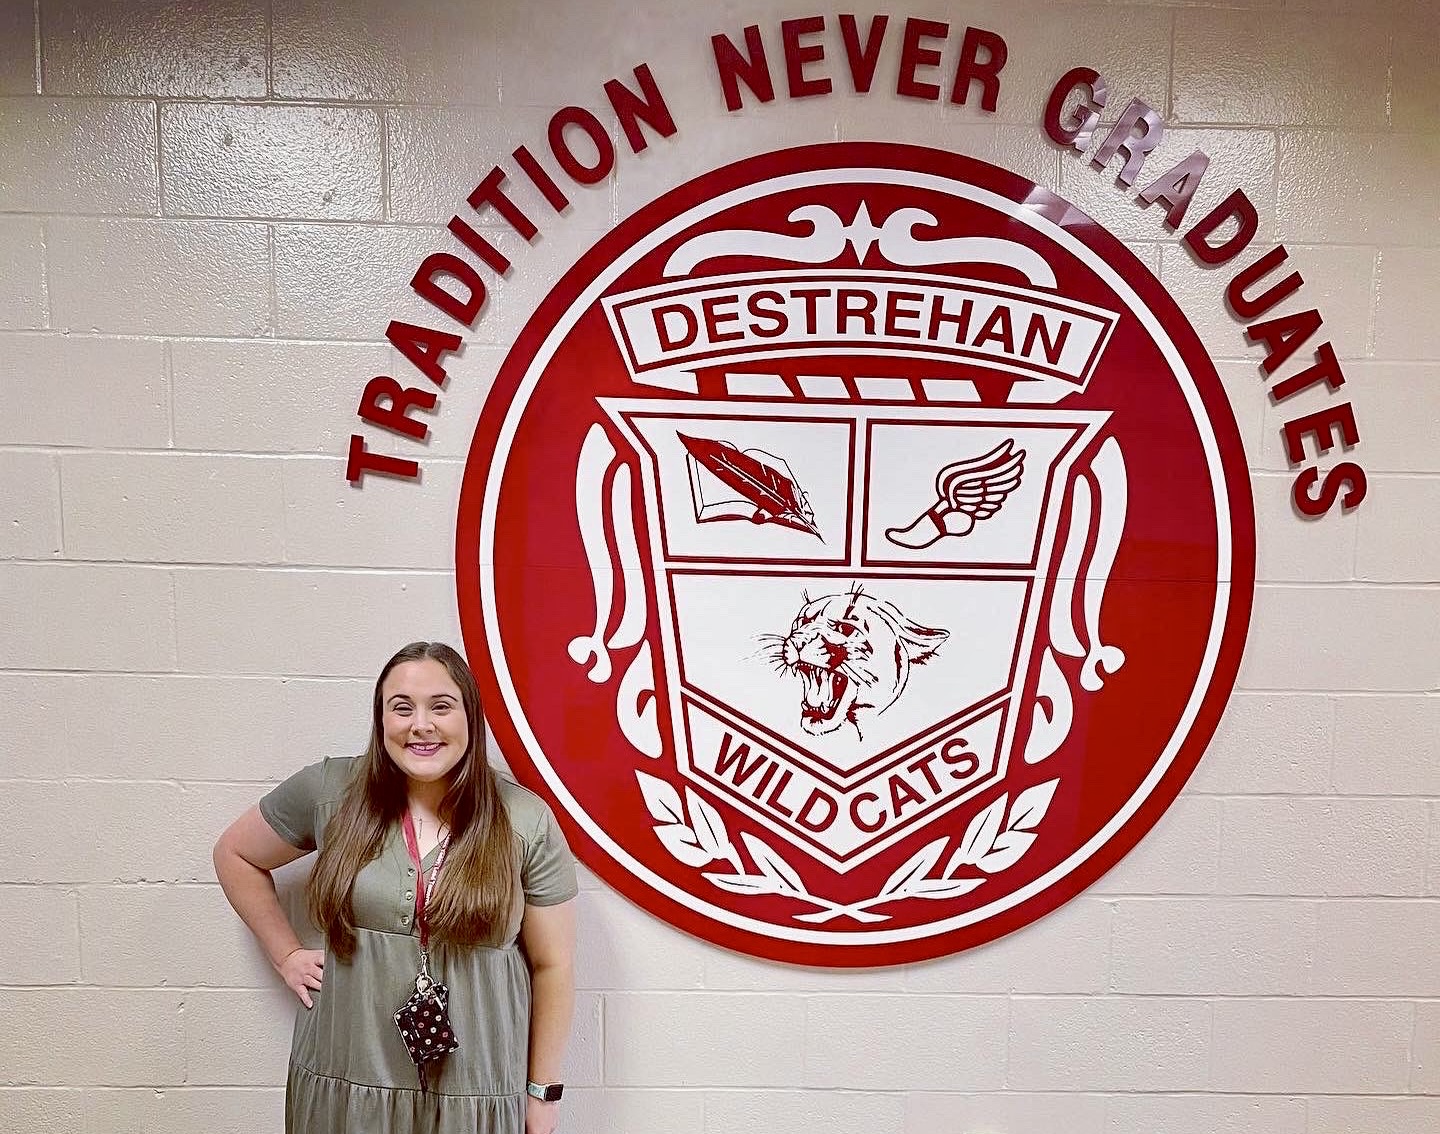 Macy in the hallway posing in front of Destrehan High insignia